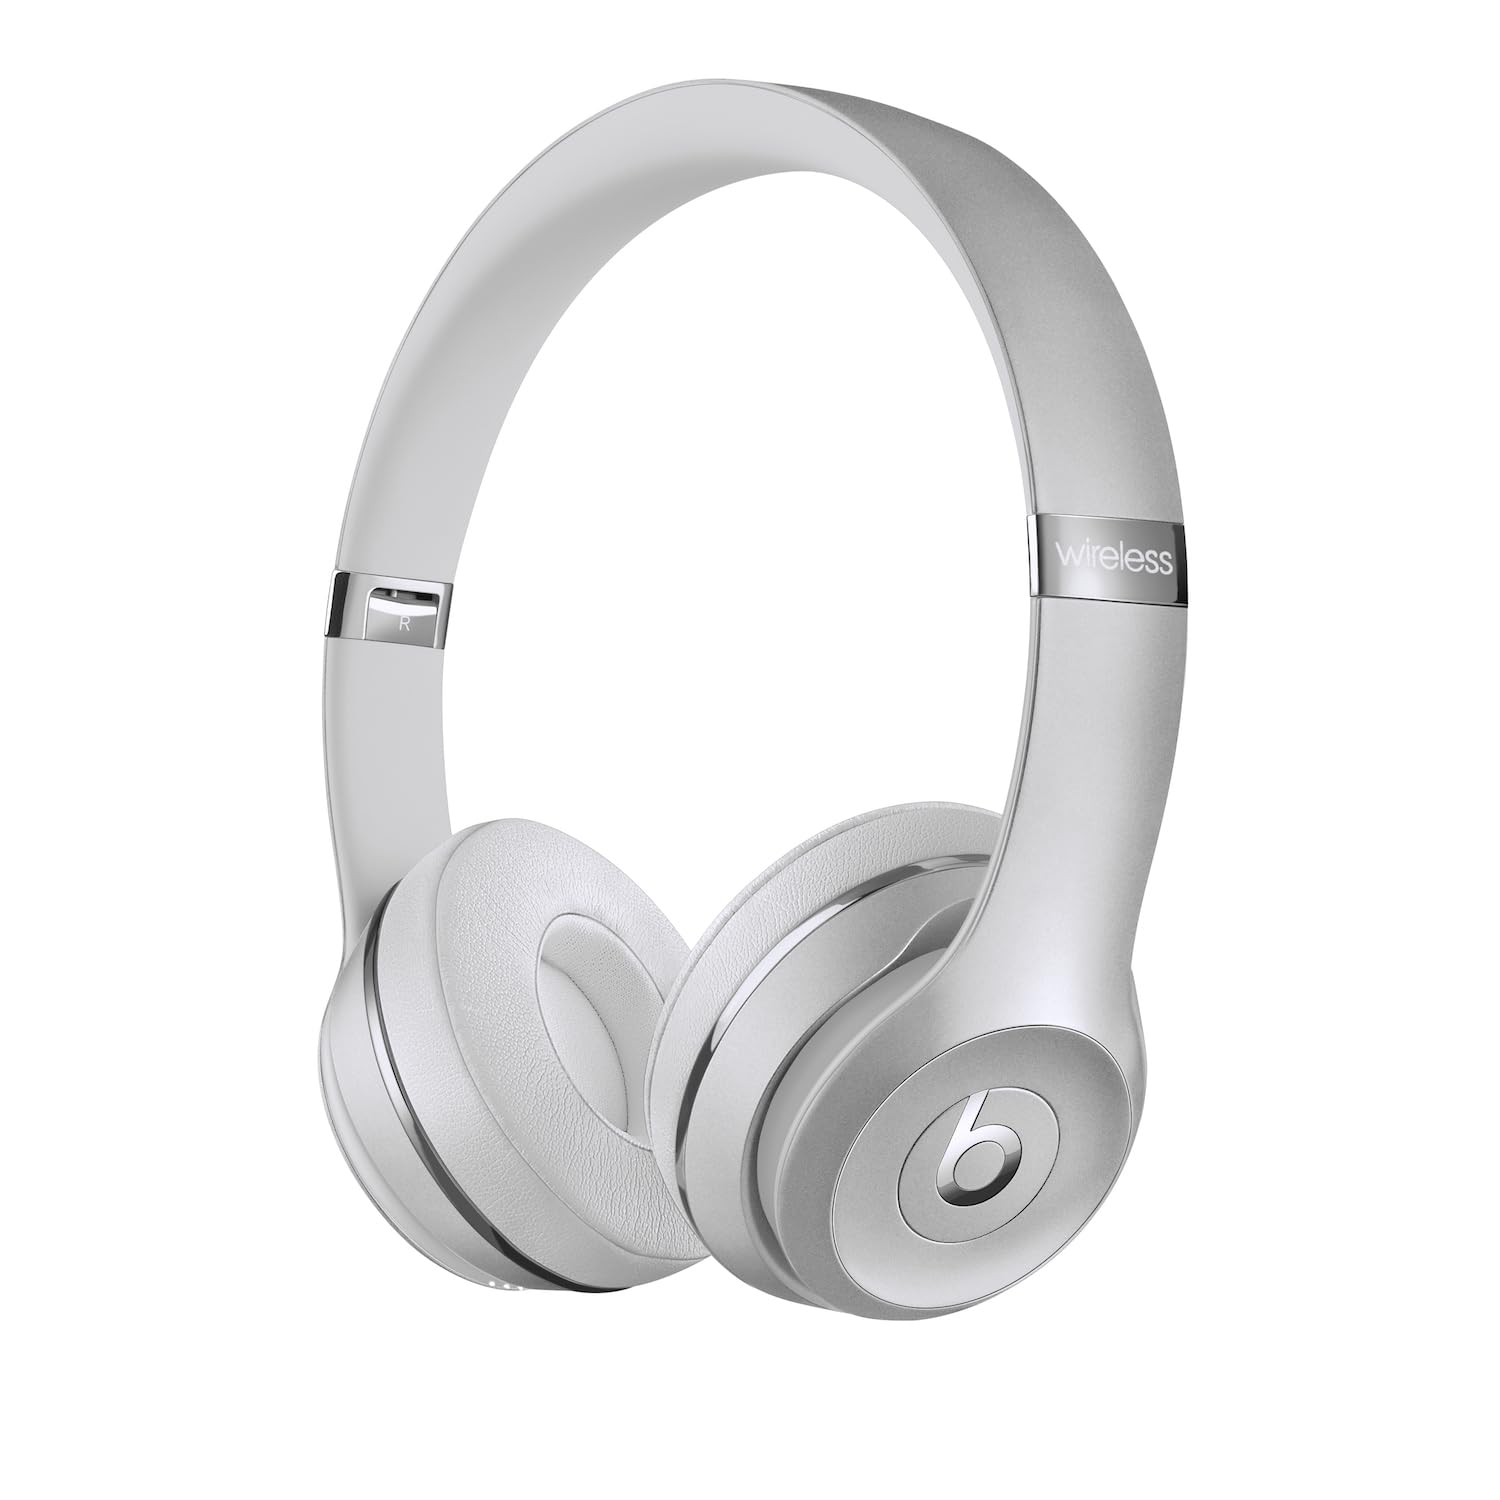 Beats Solo3 Bluetooth Wireless On-Ear Headphones (Silver, Black, Red, or Rose Gold) $99.95 + Free Shipping